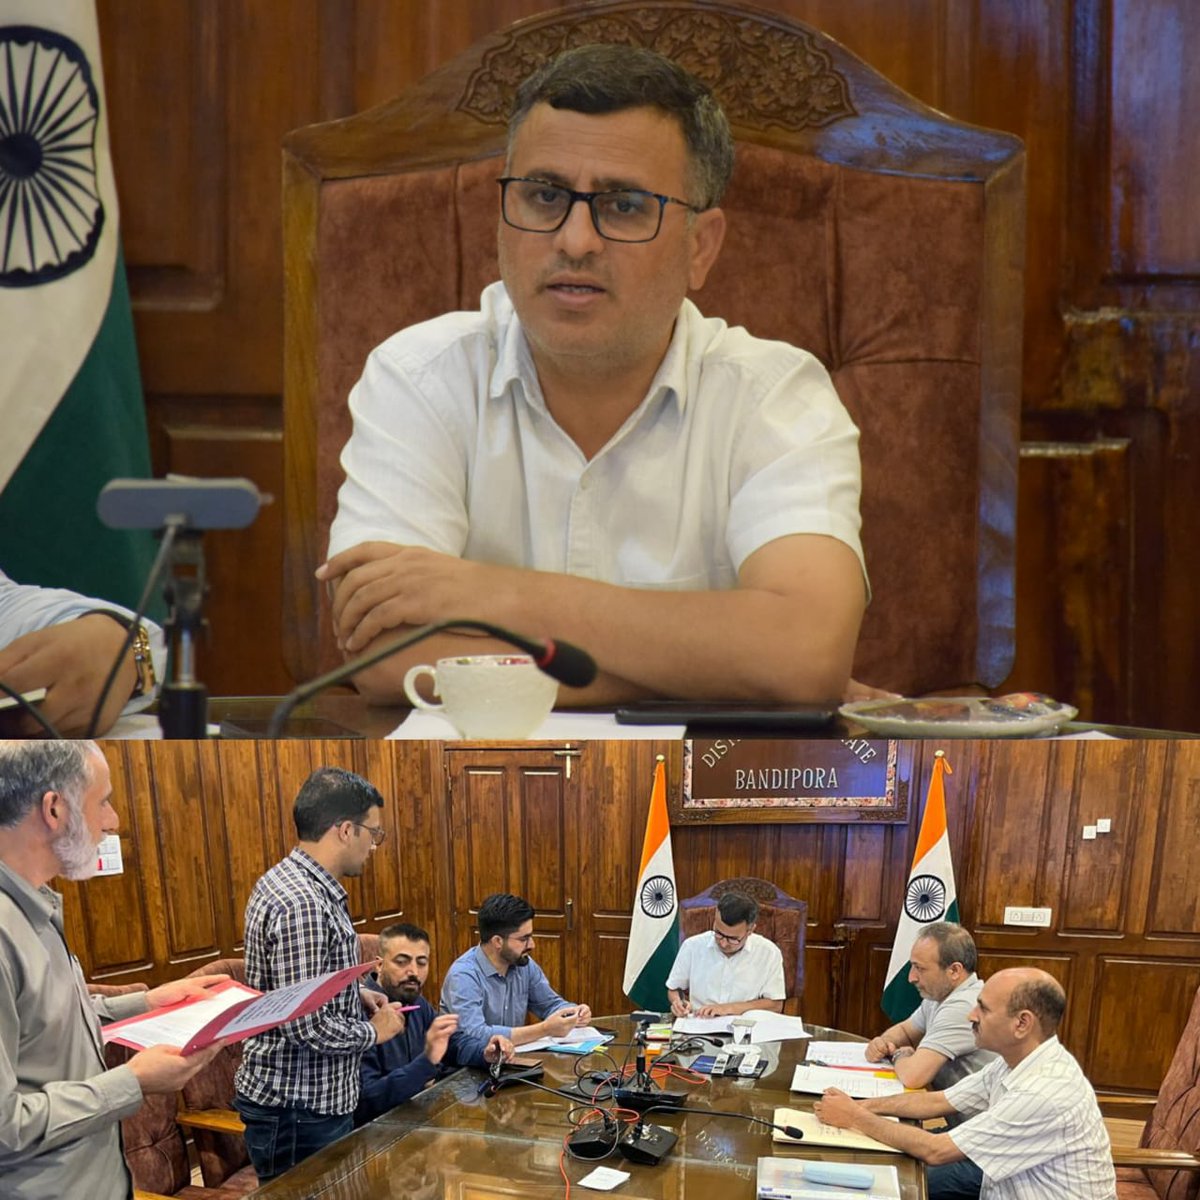 DC #Bandipora Shakeel ul Rehman chairs District Level Implementation Committee Meeting under HADP. 668 Cases approved under Agriculture & allied sectors. @diprjk @ddnewsSrinagar @dicbandipora